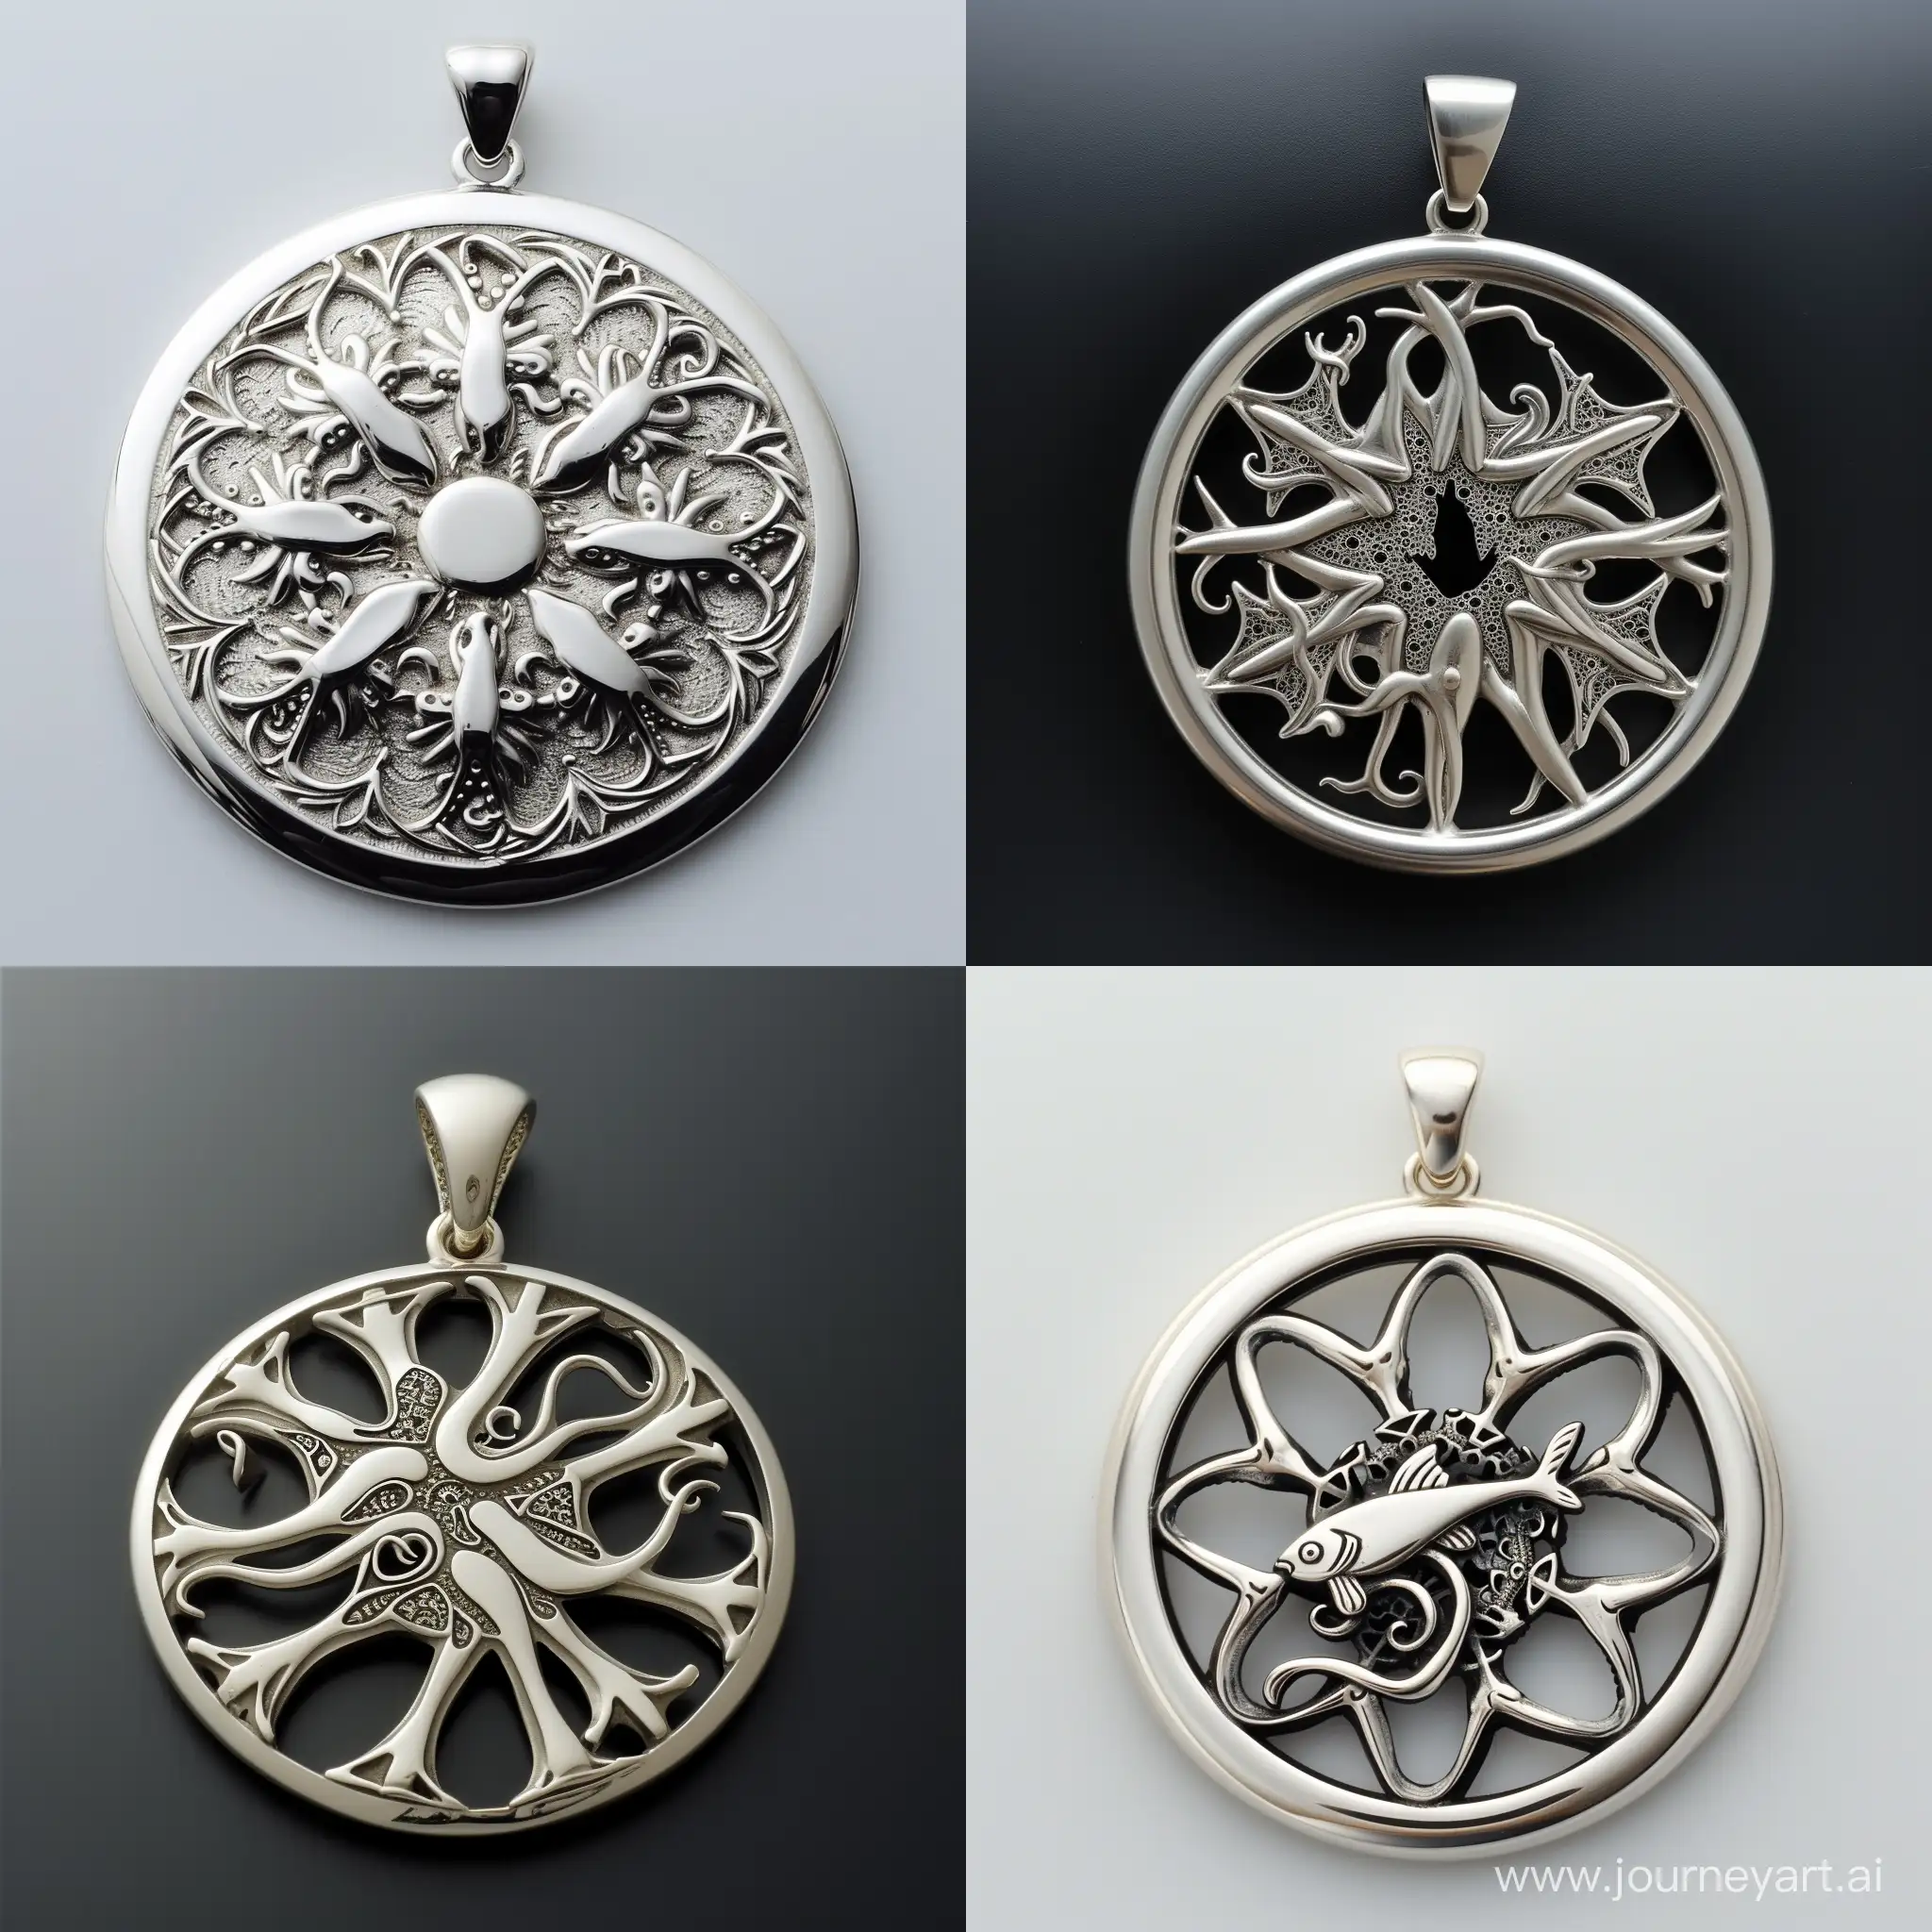 Silver pendant in the shape of a wheel,
the center of the pendant is a fractal pattern of legs, intertwined octopus tentacles and a fish silhouette